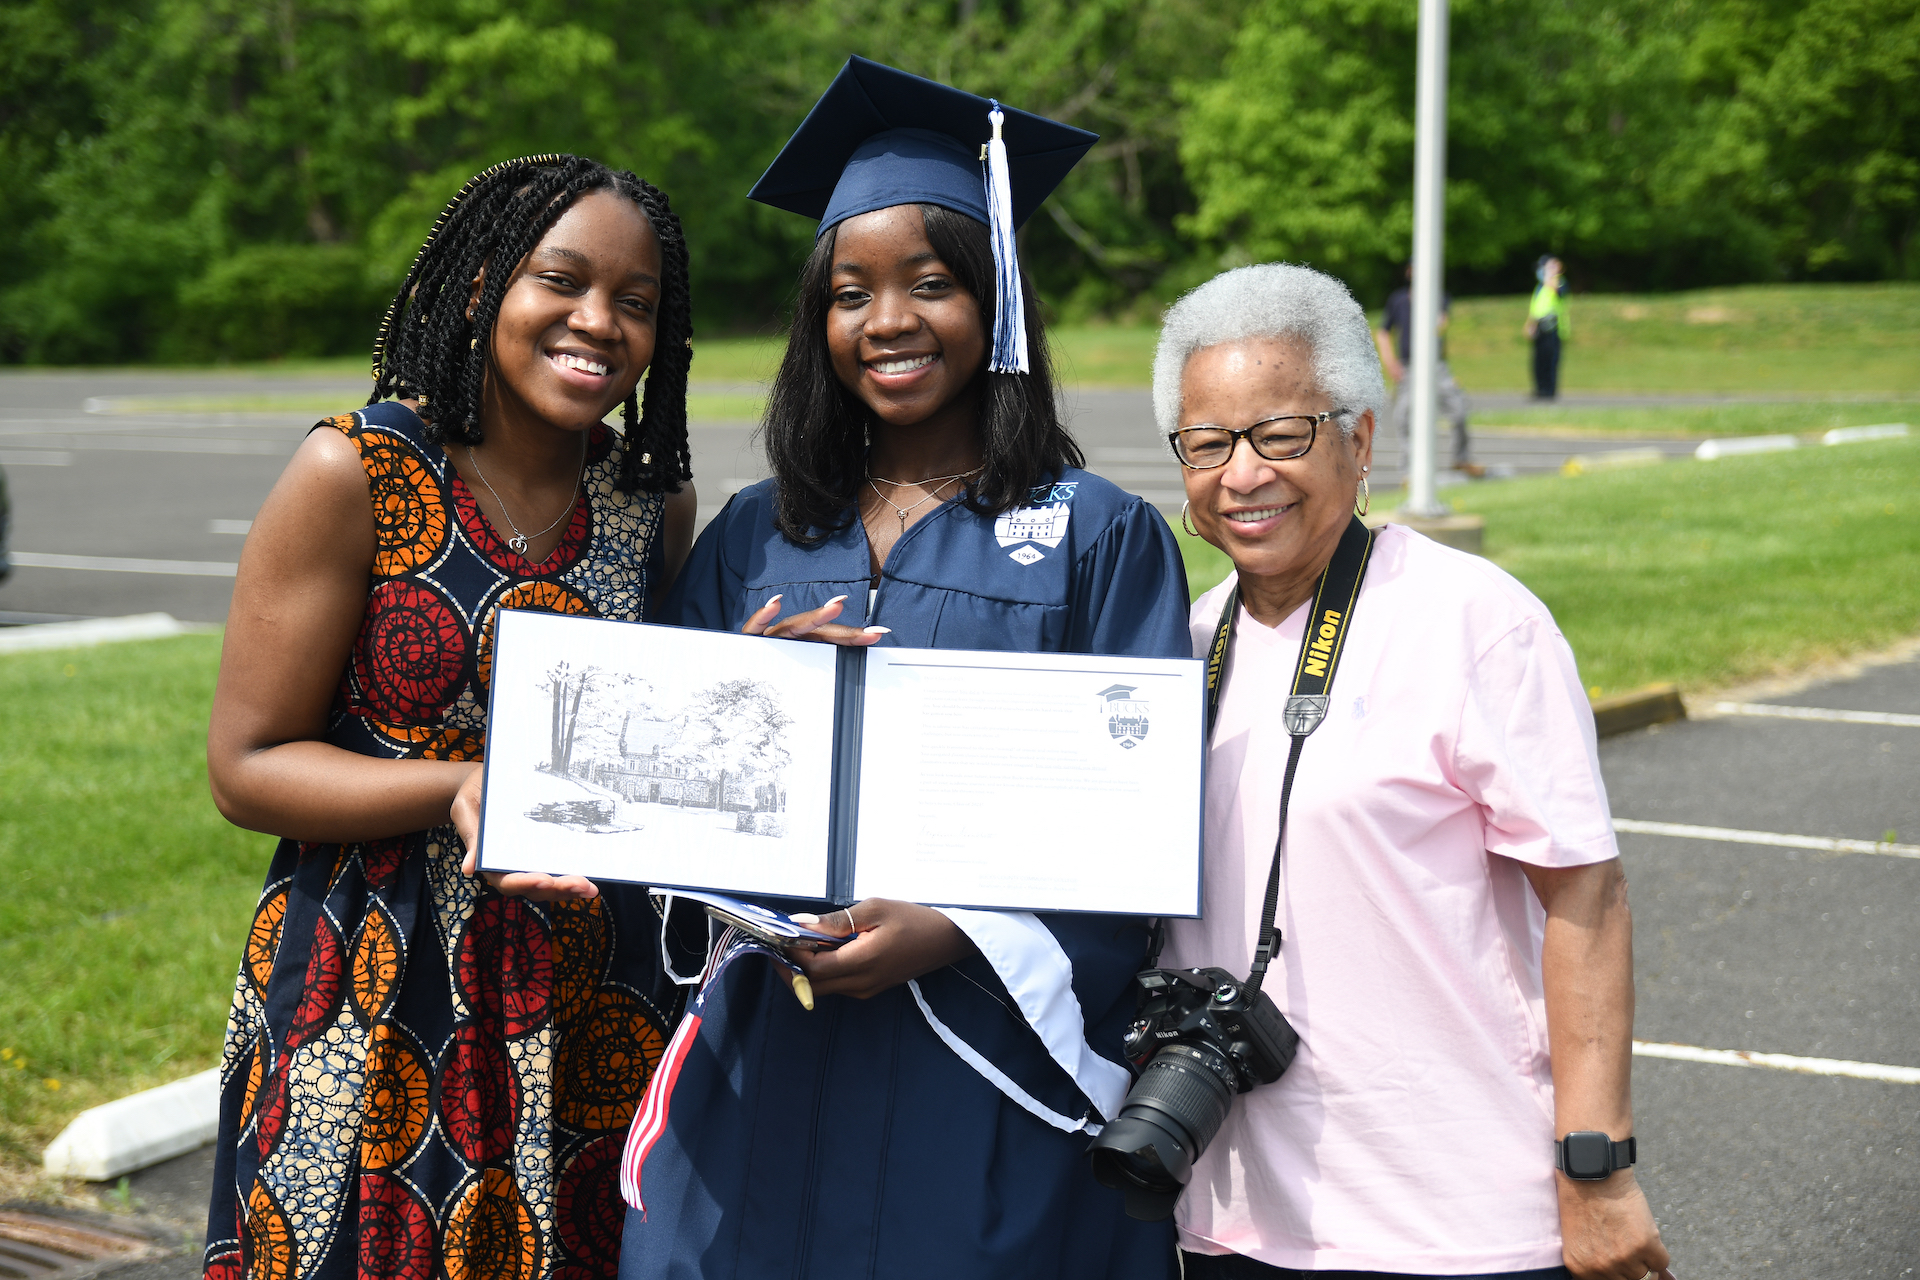 young woman graduating college and posing in cap and gown with diploma, accompanied by two guests